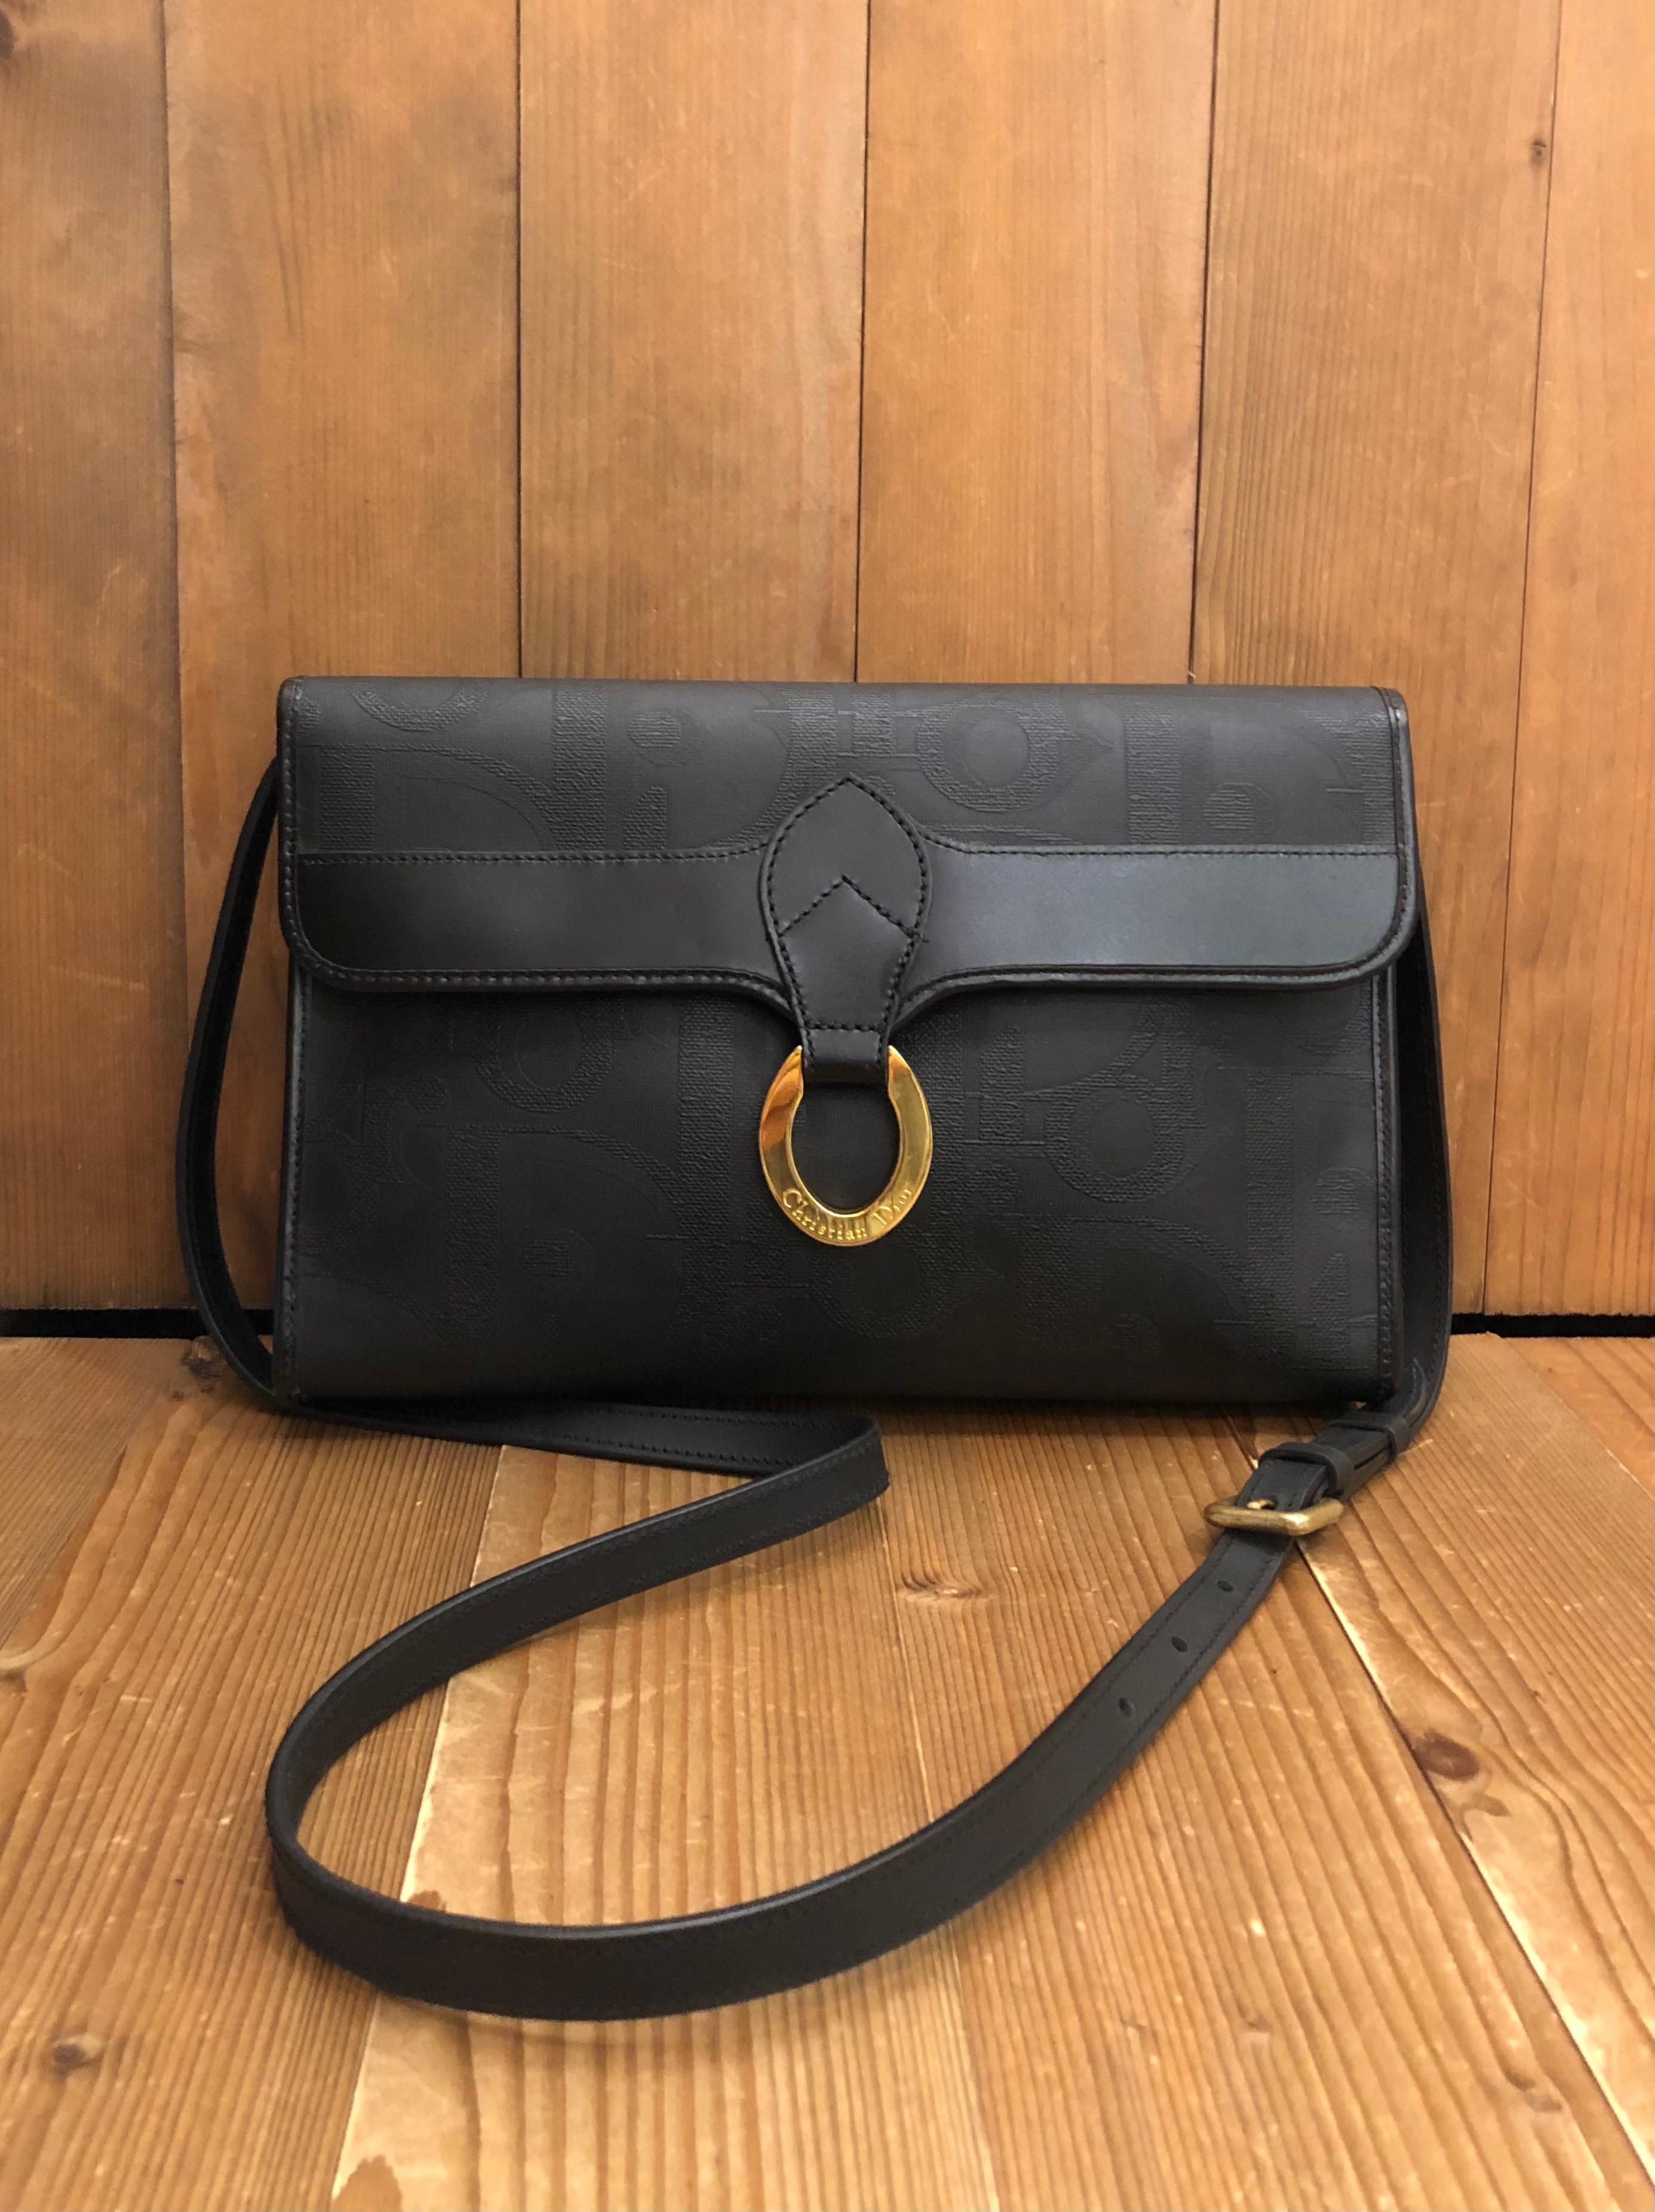 Vintage CHRISTIAN DIOR 2-way clutch/crossbody bag in Dior’s black coated canvas featuring a front flap magnetic snap closure. This Dior opens to a beige coated interior with a zippered pocket in the middle. It can be carried as a clutch without the